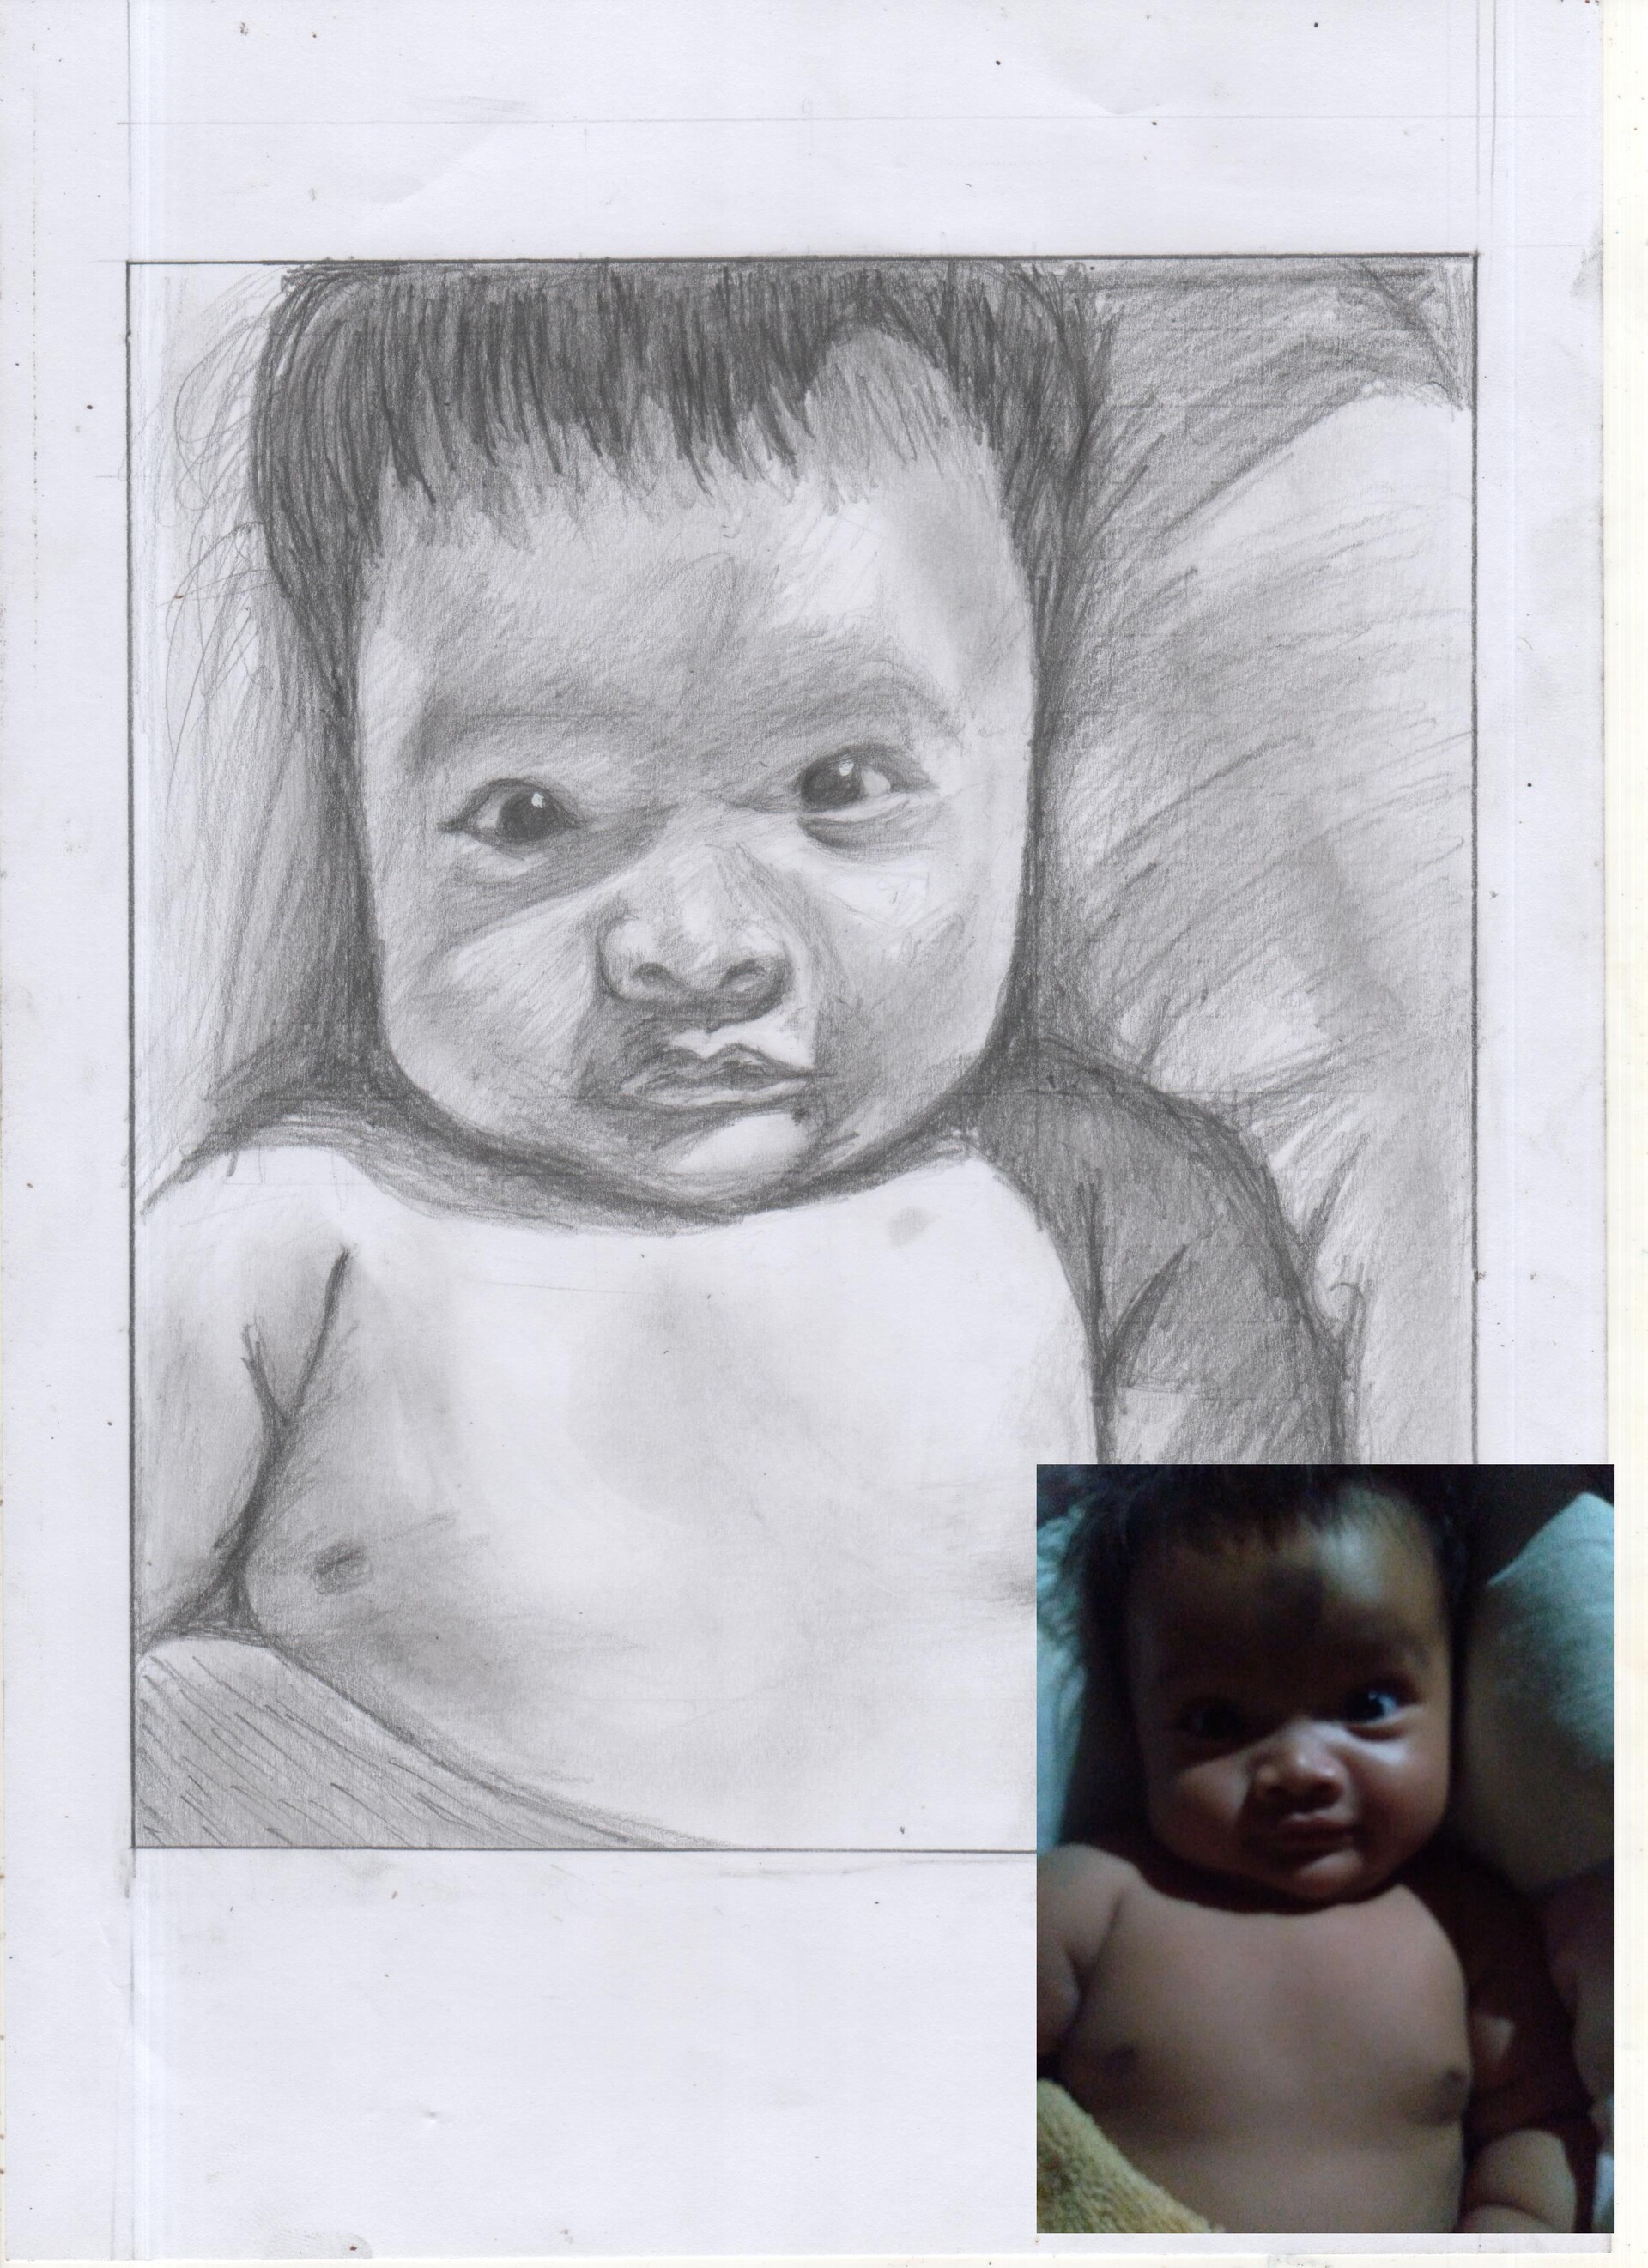 Buy Baby Portrait,custom Pencil Sketch From Photo, Custom Baby Drawing From  Photo, Original Portrait, Sketch Art, Custom Portrait Online in India - Etsy